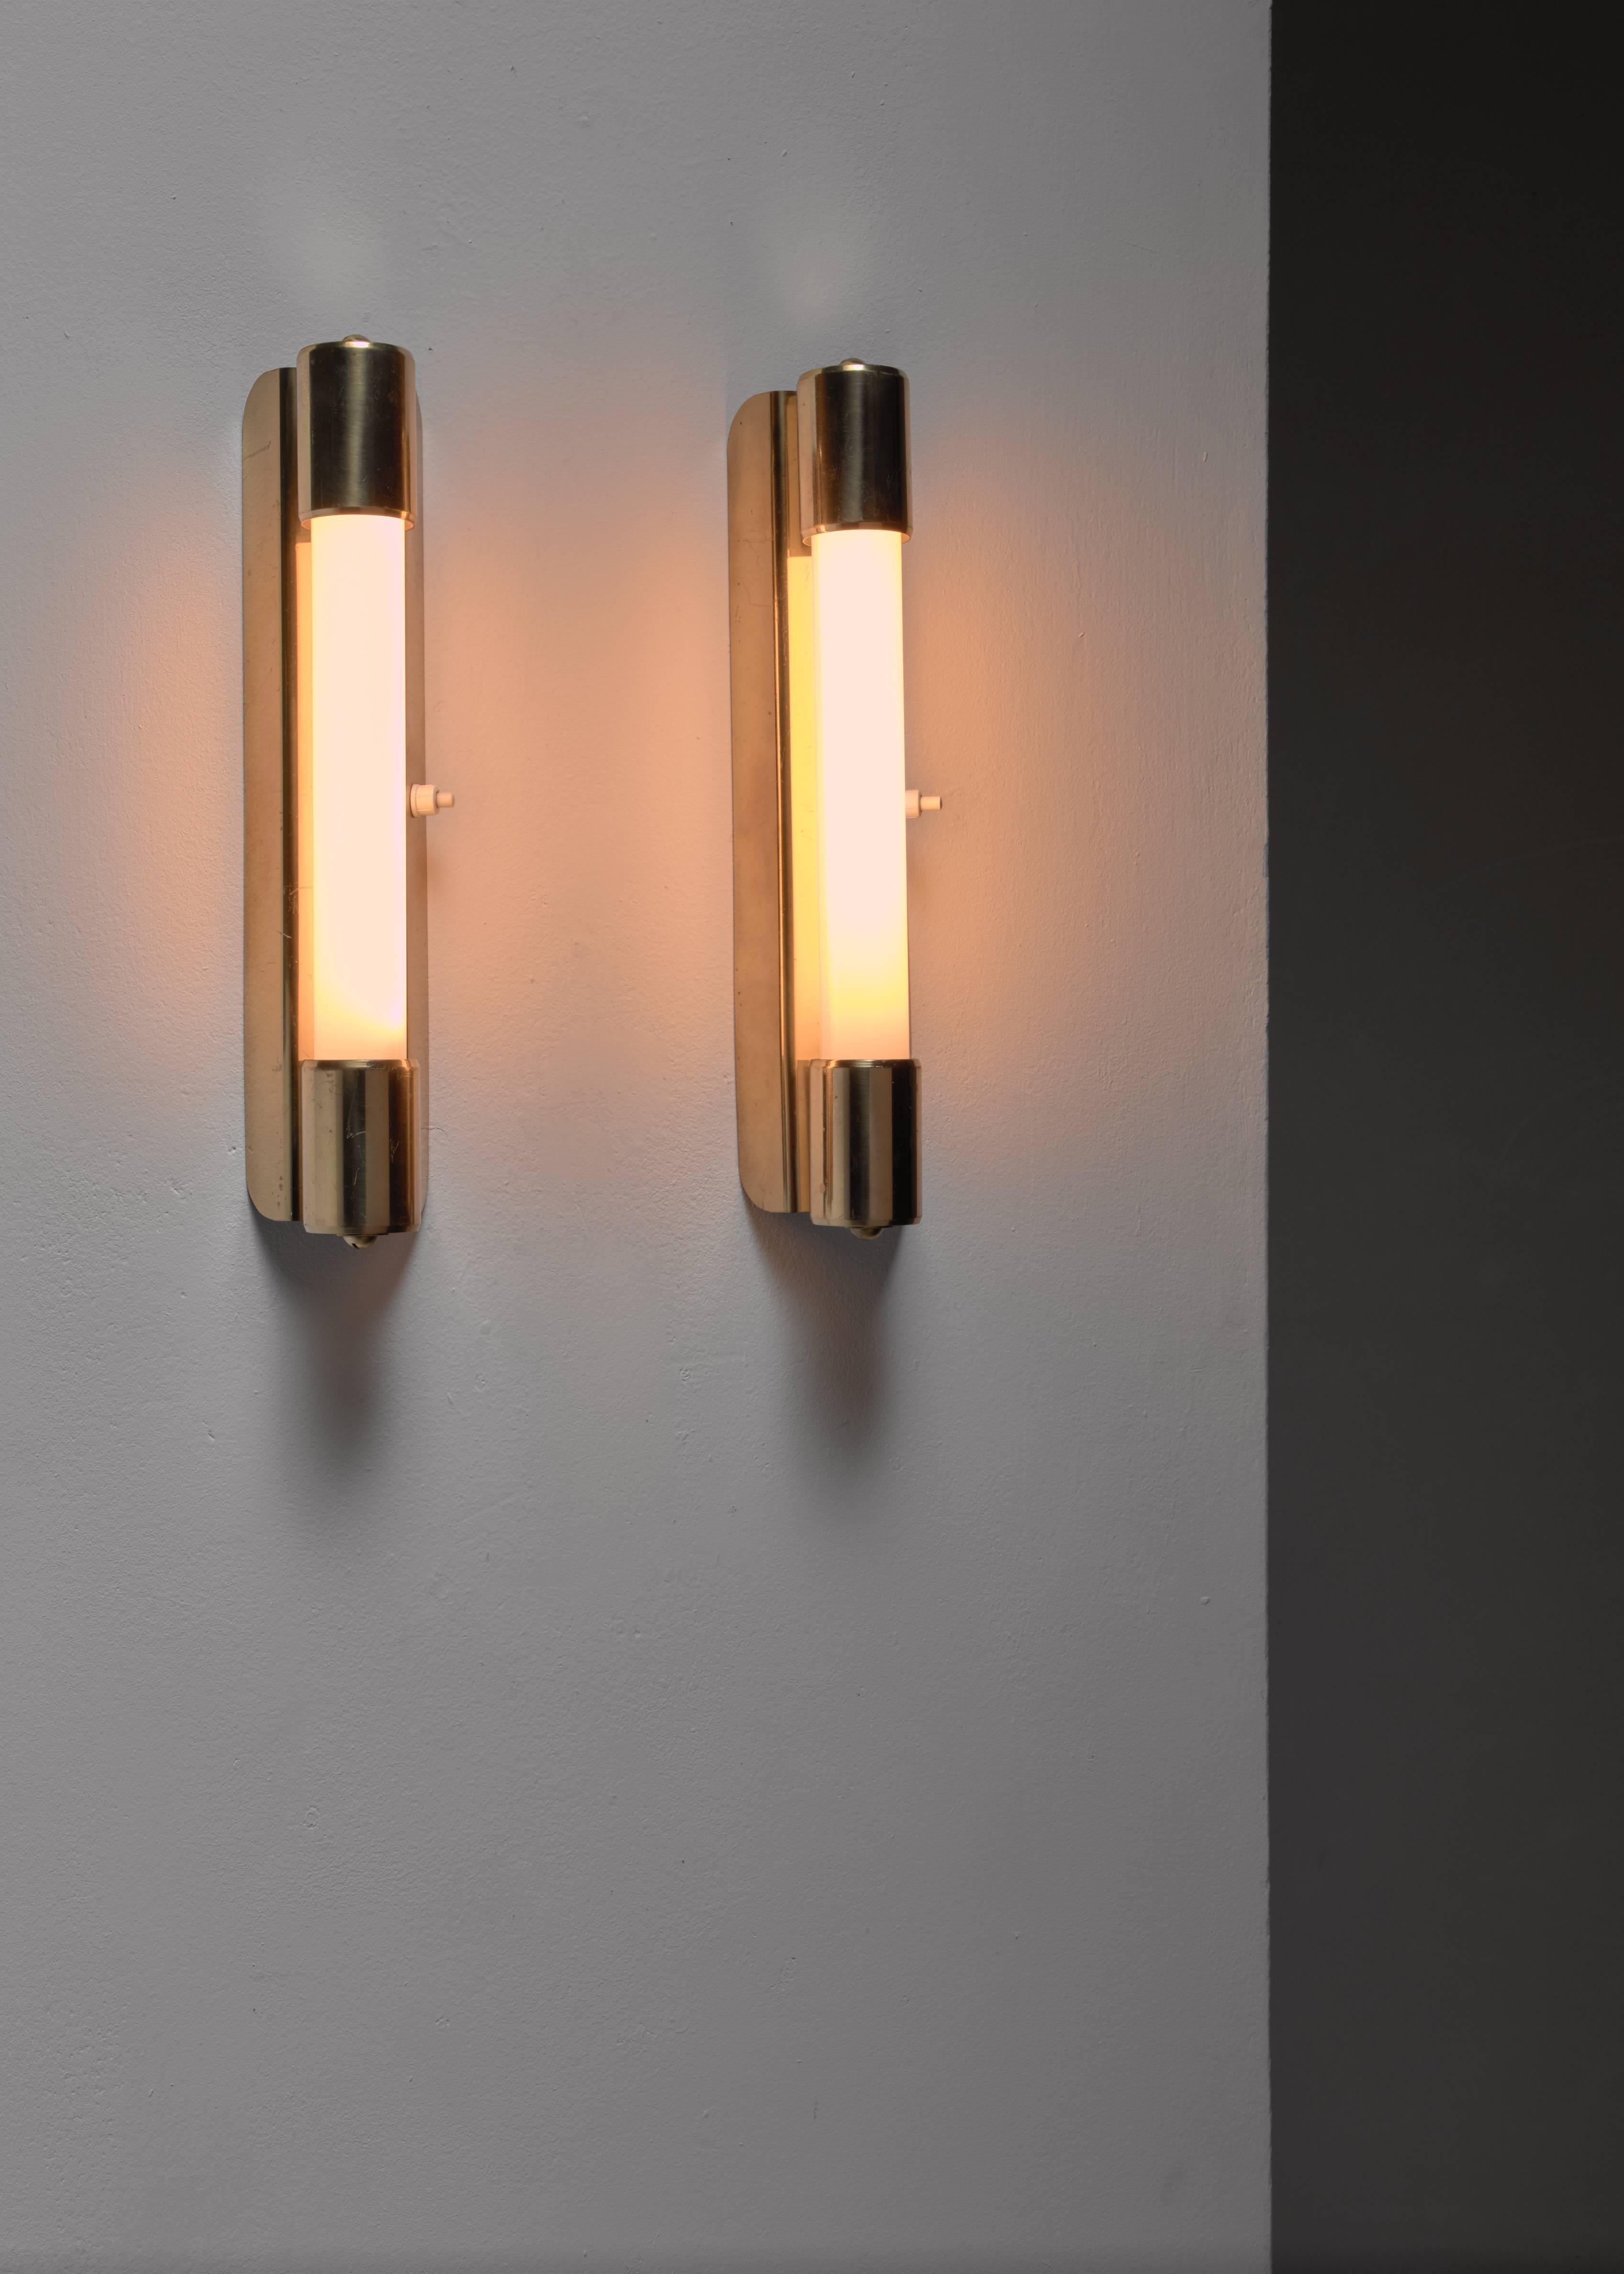 A pair of model 71032 bedside or bathroom wall lights by Mauri Almari for Idman, Finland.
The lamps are made of a brass frame with tube shaped light bulbs. Marked by Idman.
